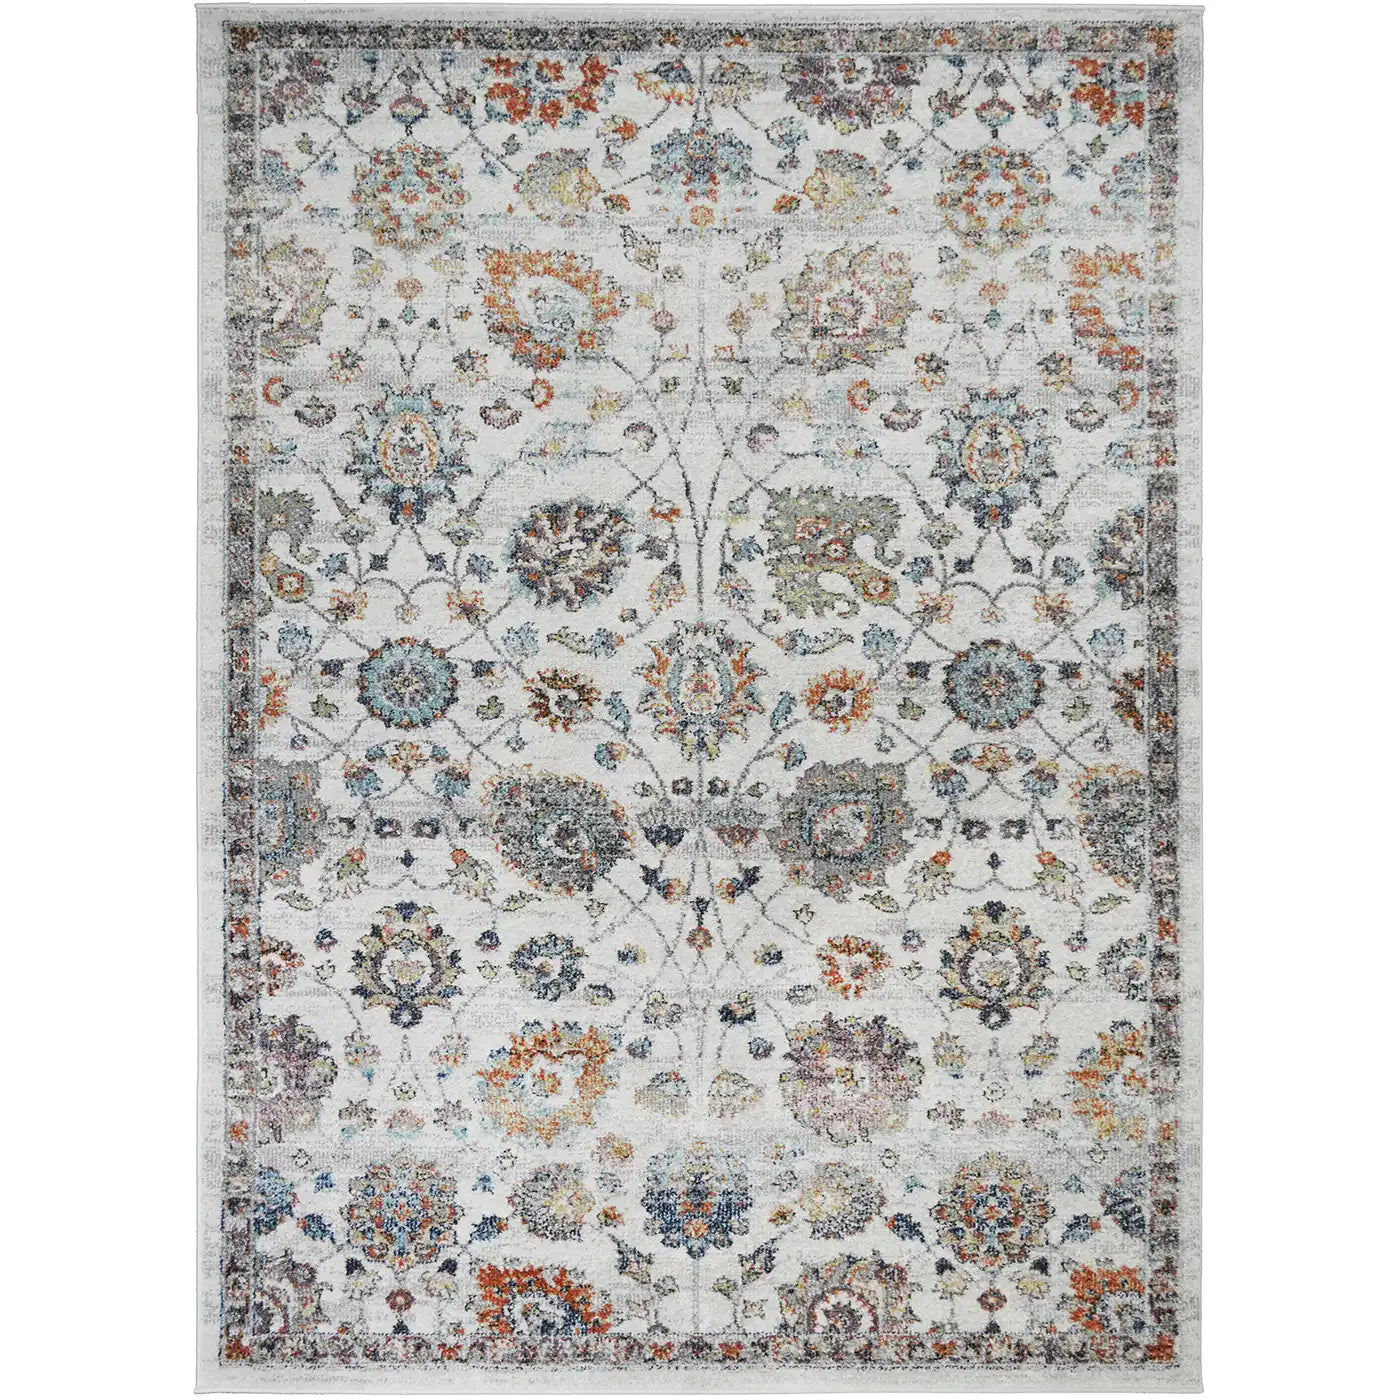 Mayberry Arlette Rug in Oriental/Traditional & Vintage/Distressed style.